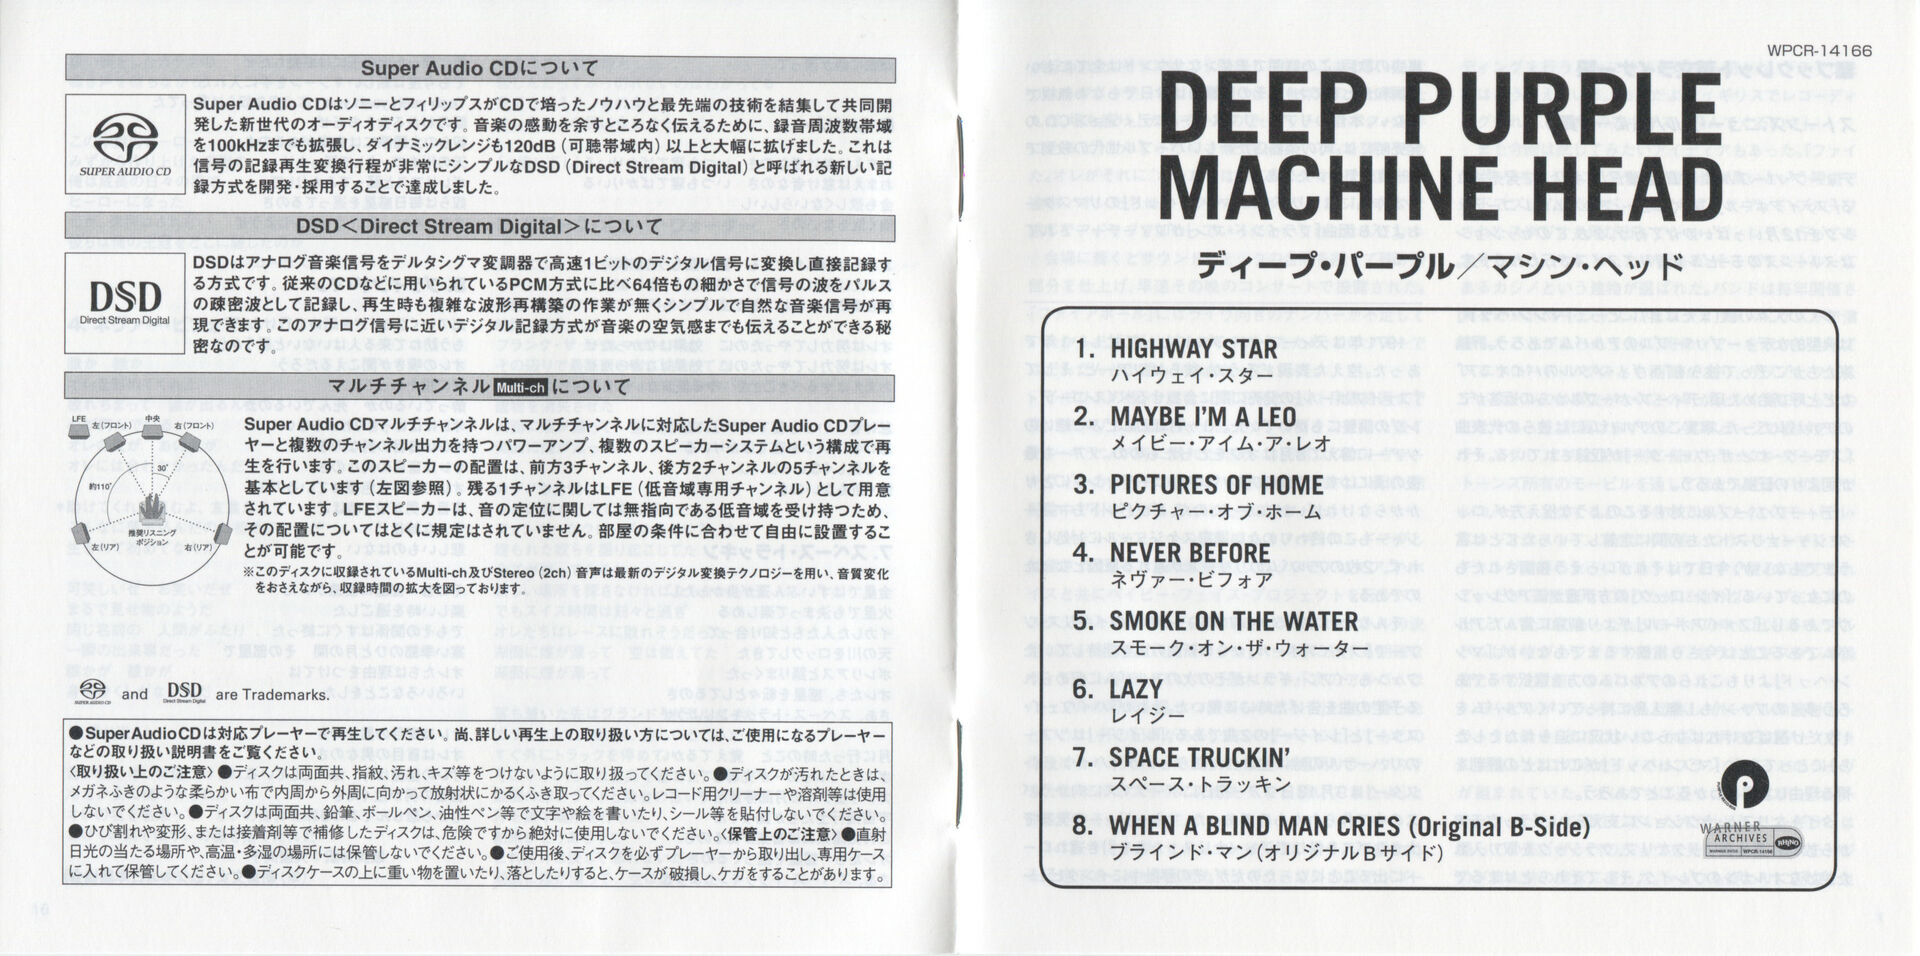 Japanese Booklet Out.jpg